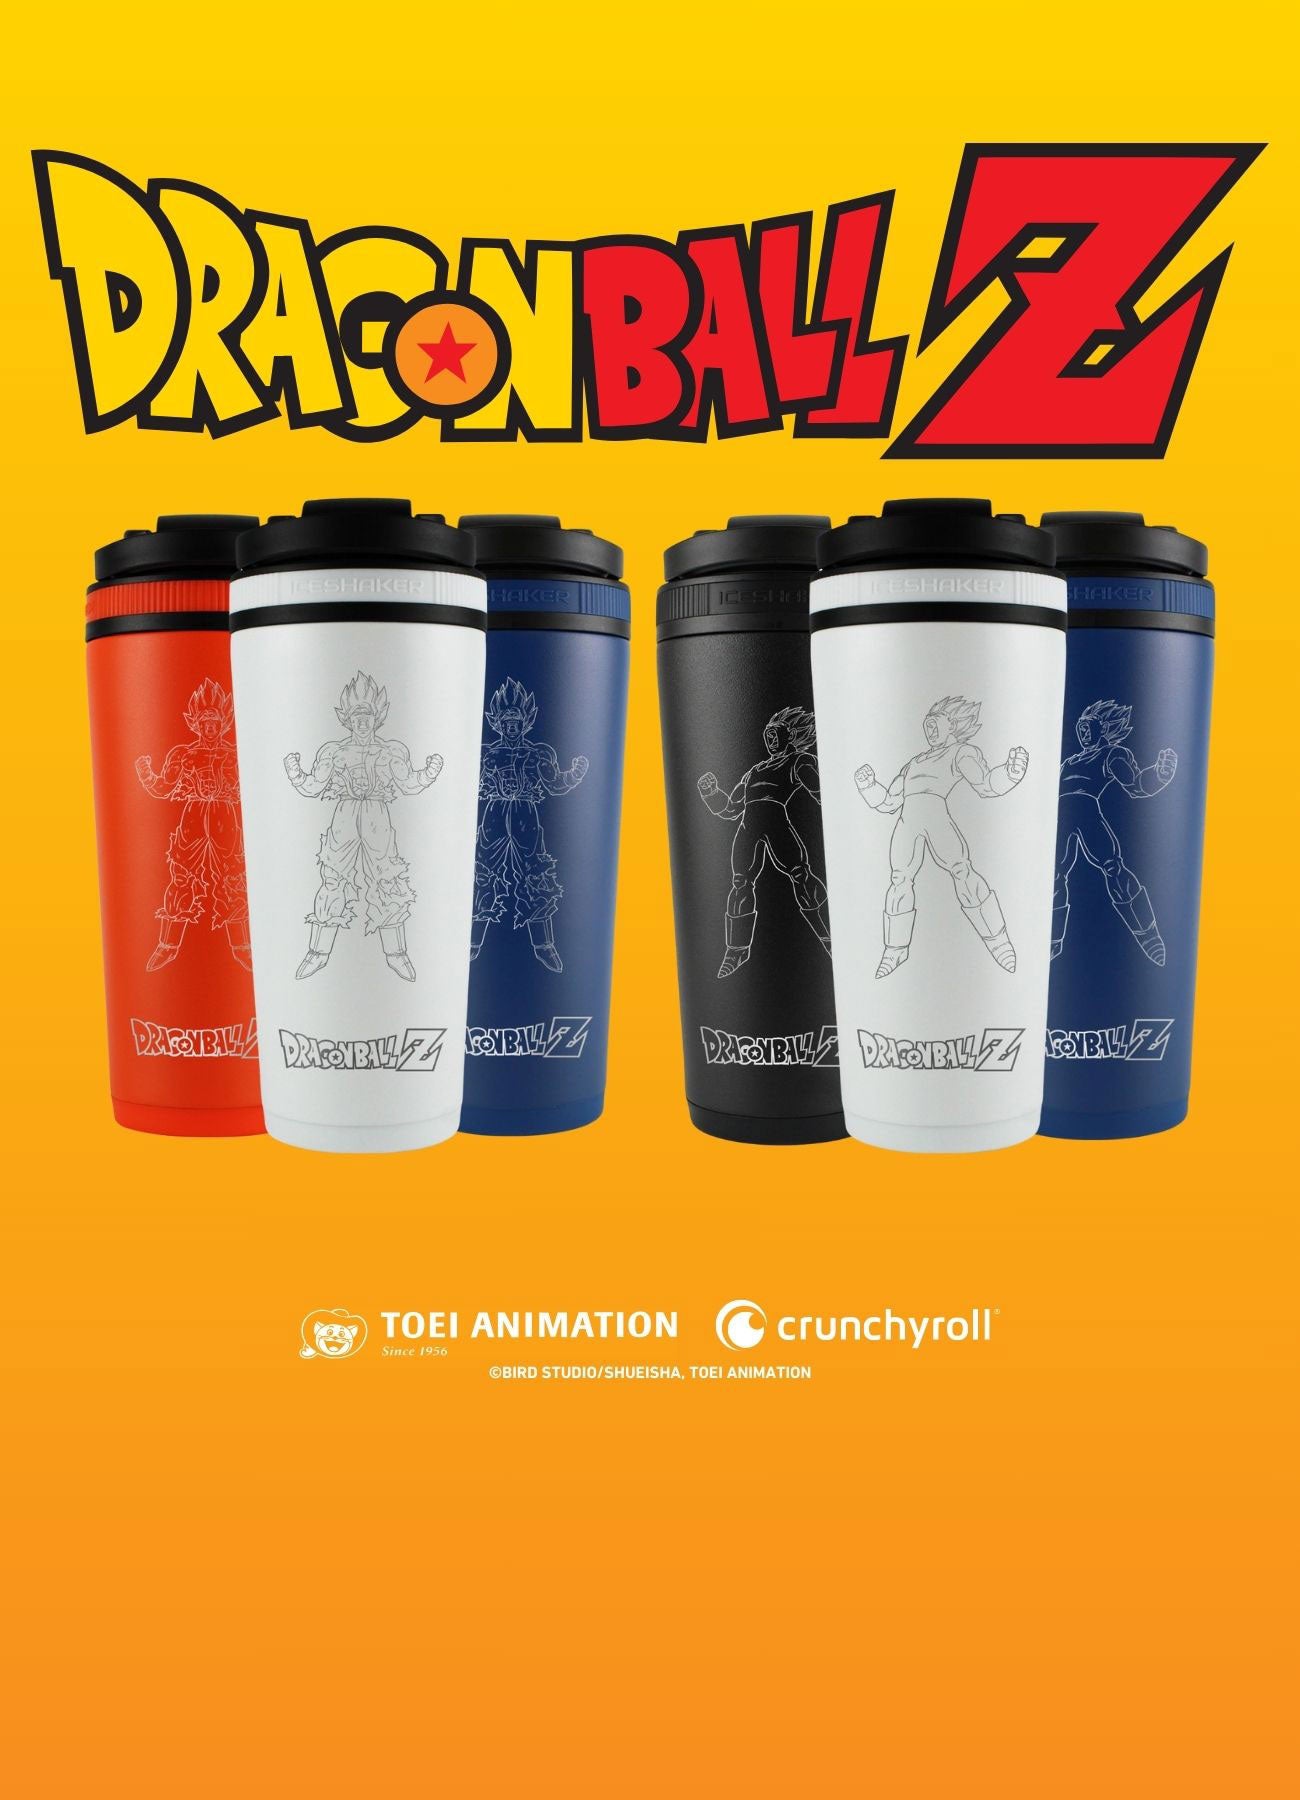 DragonBall Z 26oz Ice Shakers, Now Available! Click to shop now.